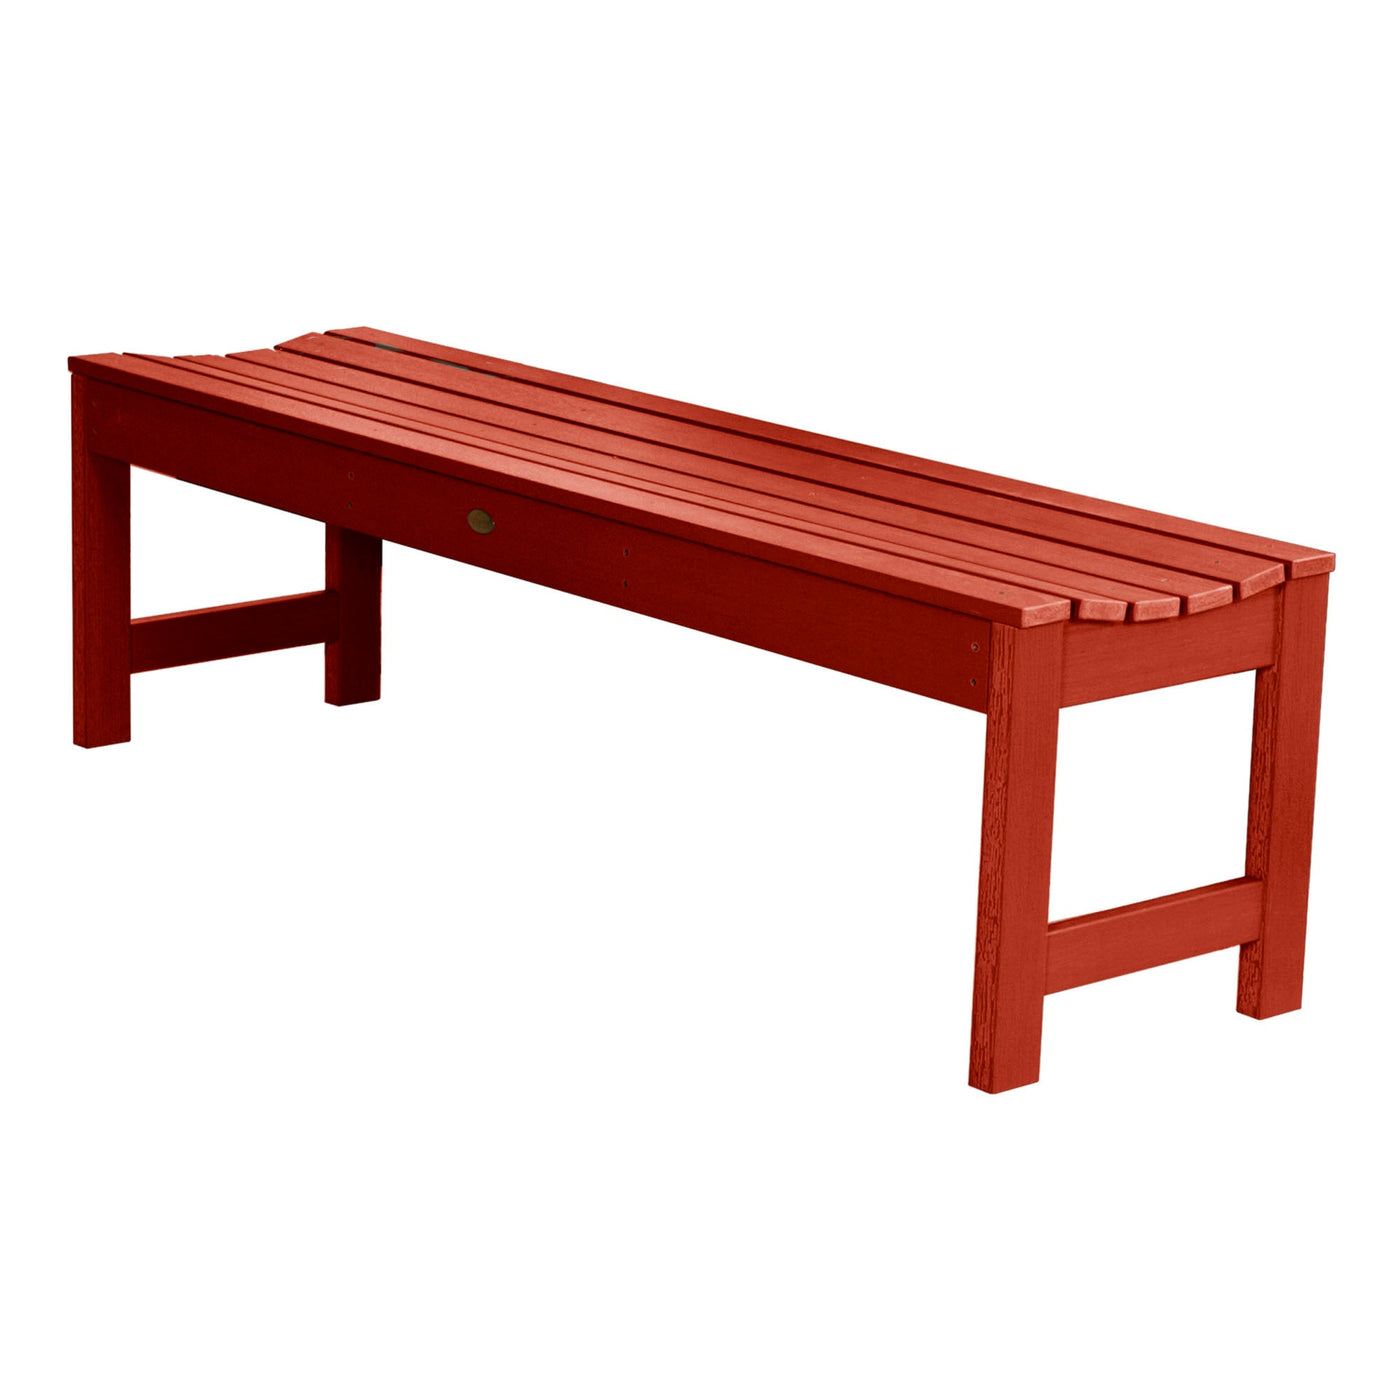 Lehigh Picnic Bench - 5ft Bench Highwood USA Rustic Red 